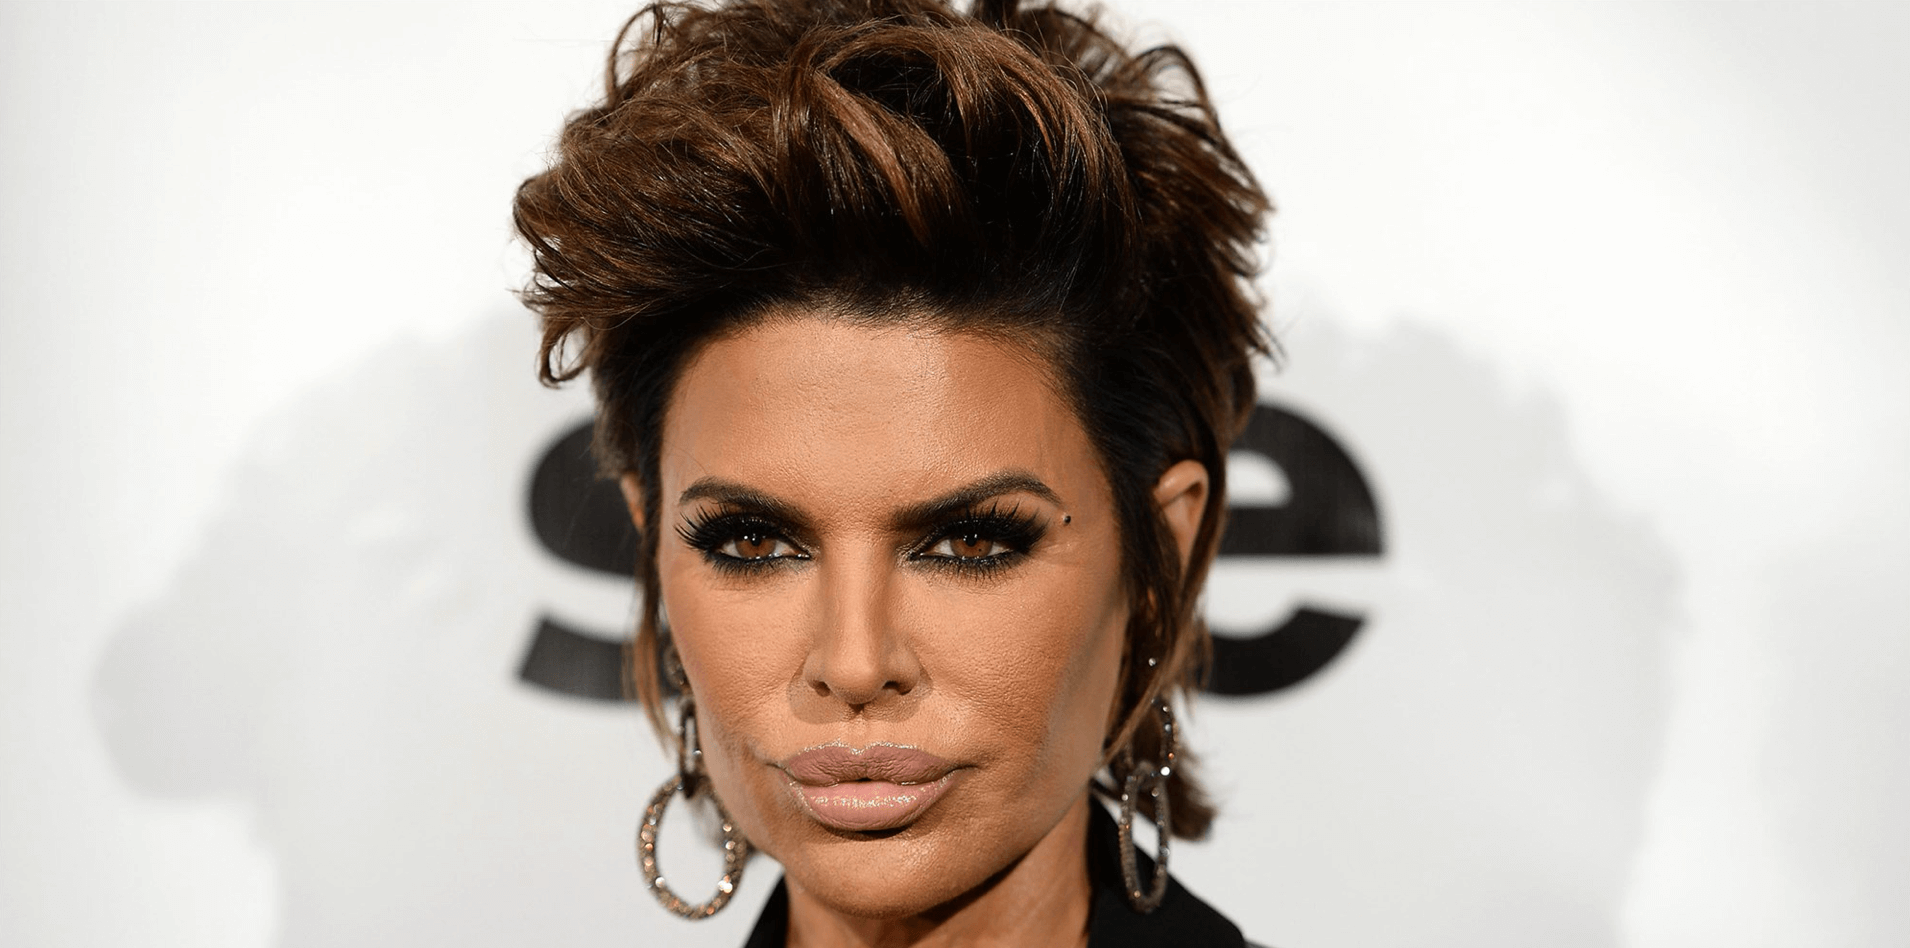 Lisa Rinna Lands New Gig Amid Rumors She’s Been FIRED From ‘RHOBH’ Over Denise Richards Bullying!